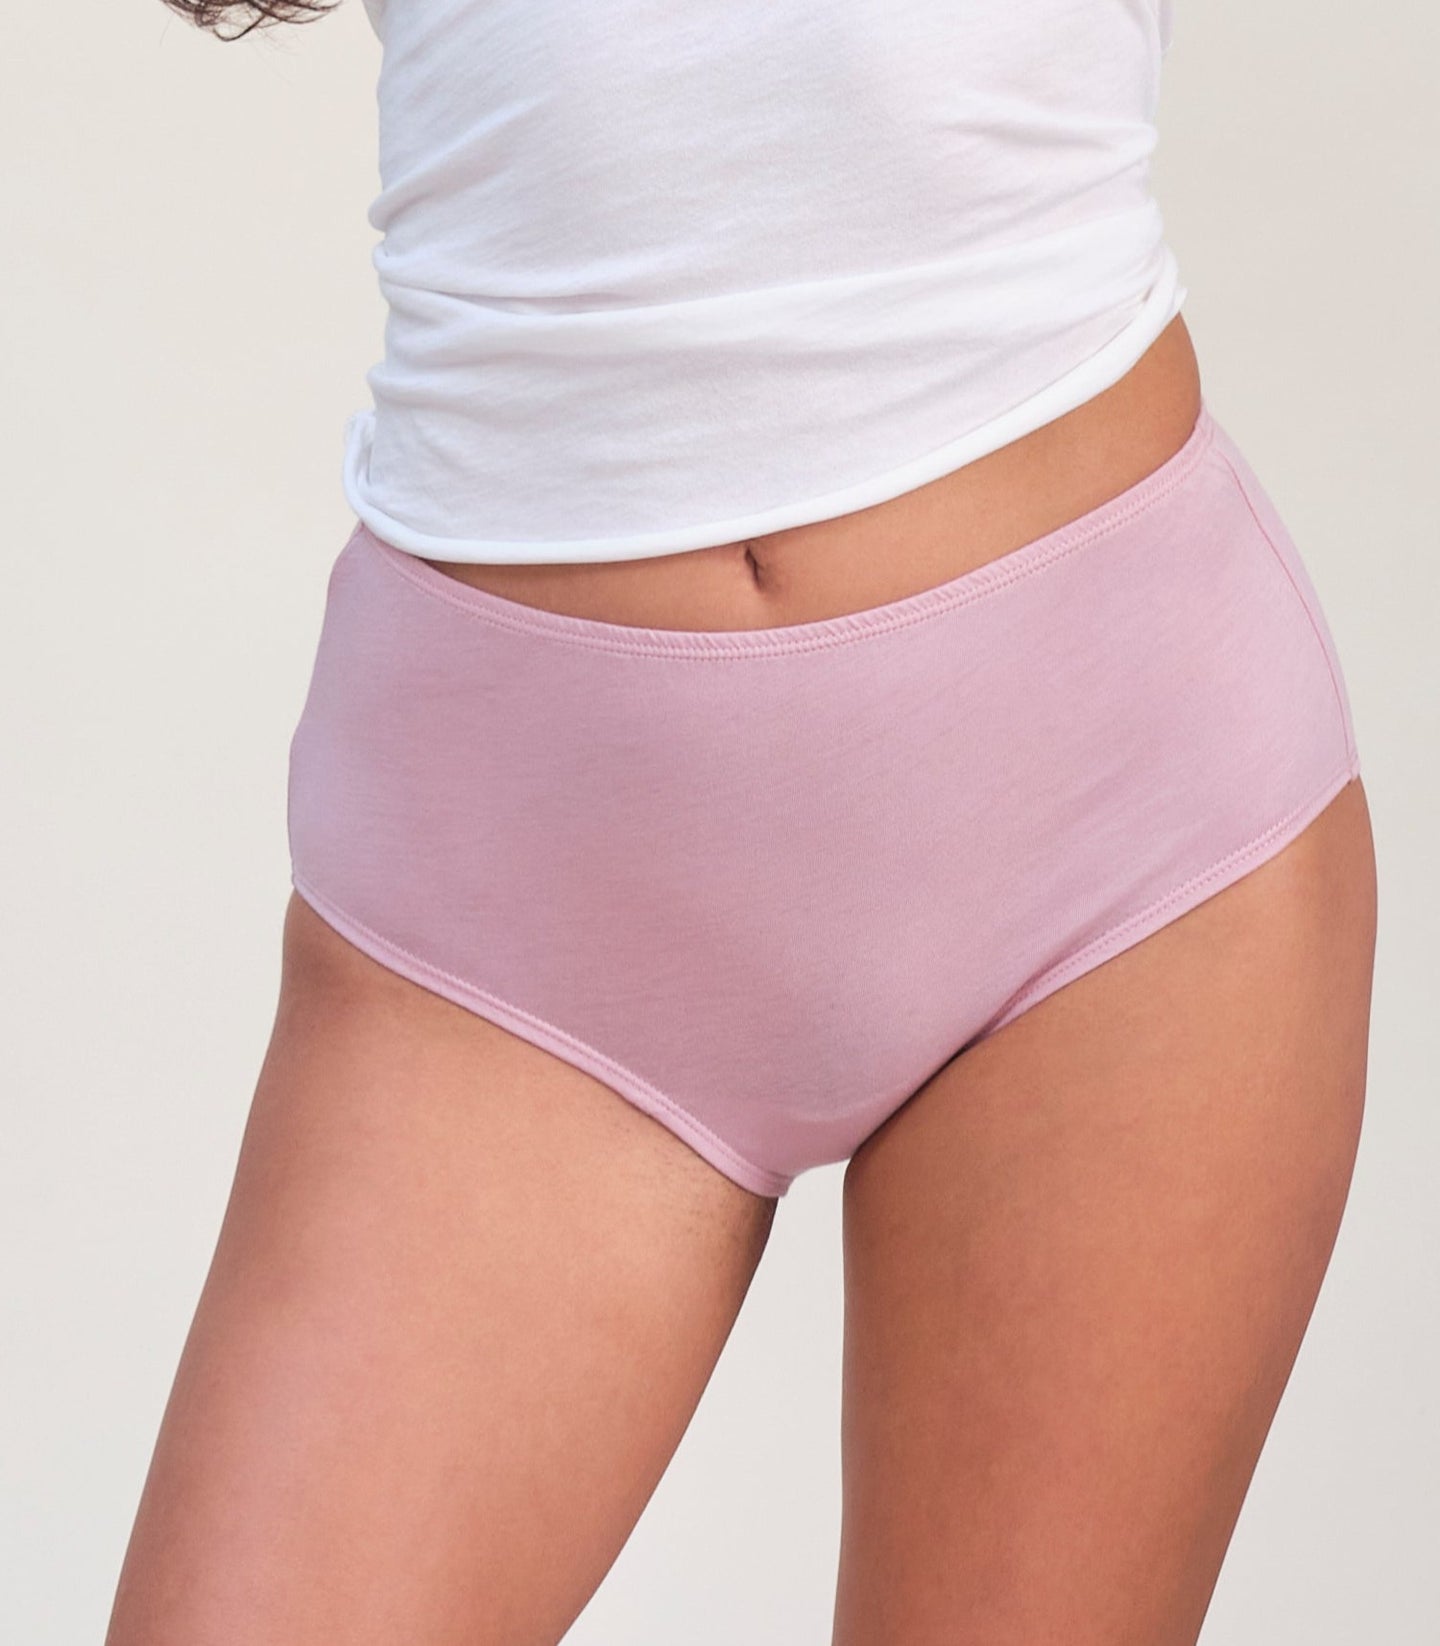 Women's Middle-Waisted Crotch of Cotton Pure Cotton Indentation  High-Quality Underwear - China 100% Cotton Underpants and Crotch of Cotton  price